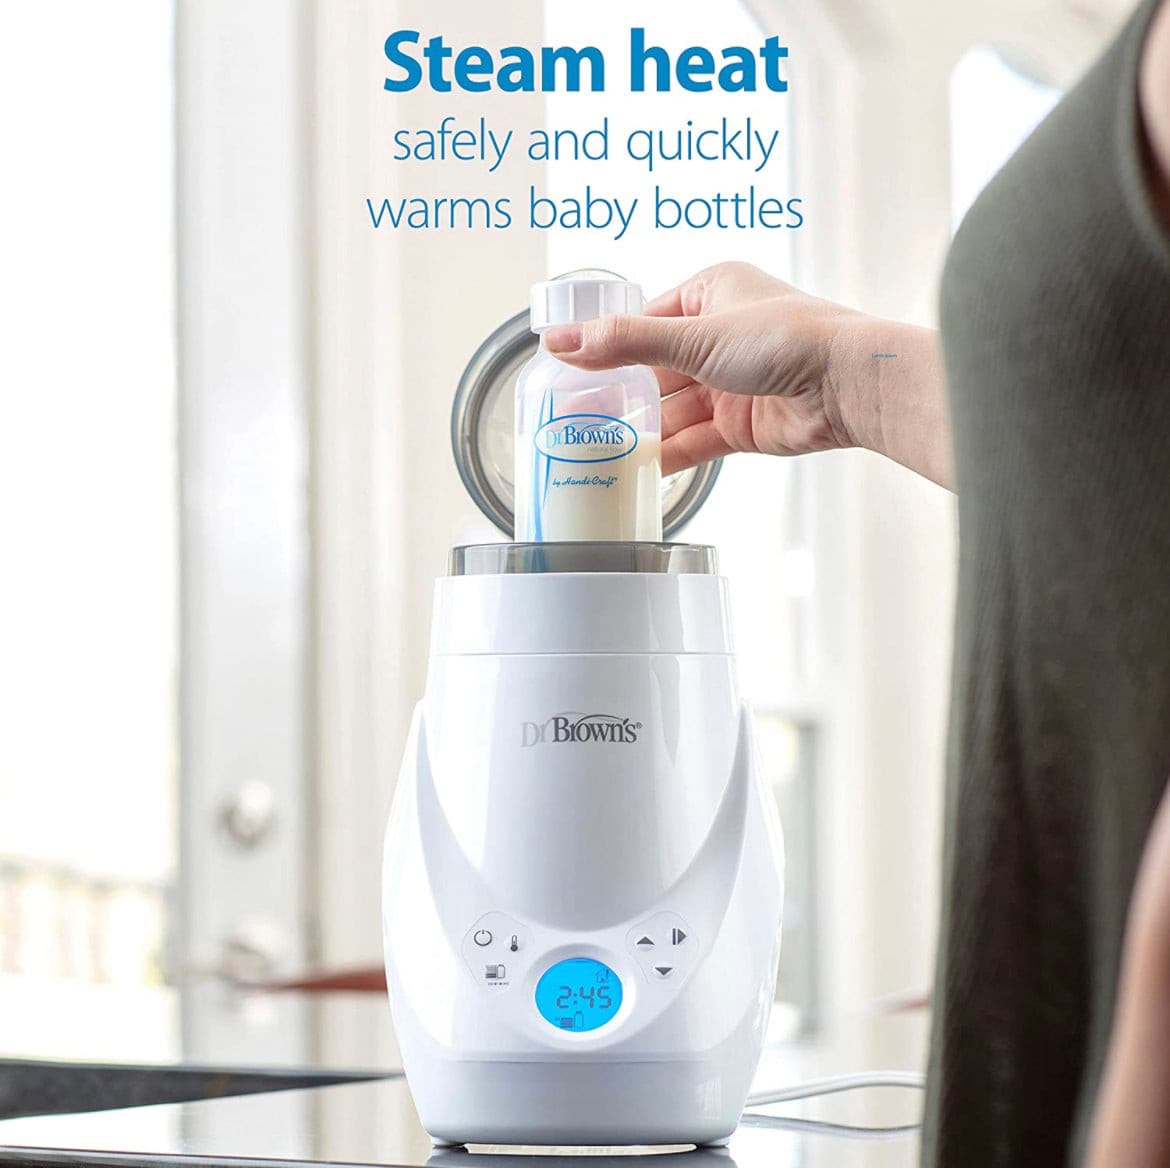 Dr. Brown’s Deluxe Baby Bottle Warmer and Sterilizer.